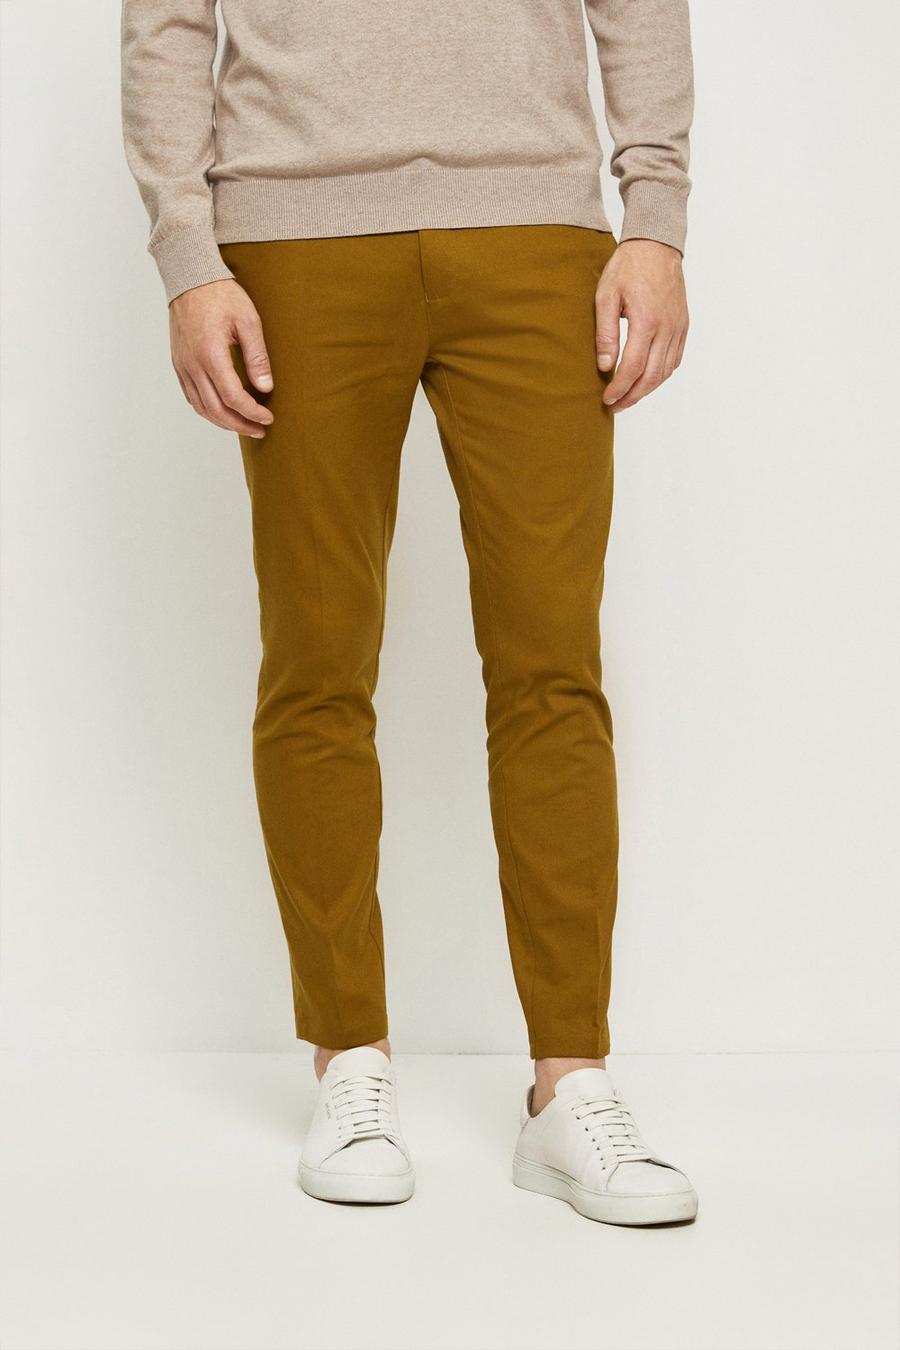 Skinny Fit Stretch Chino Trousers